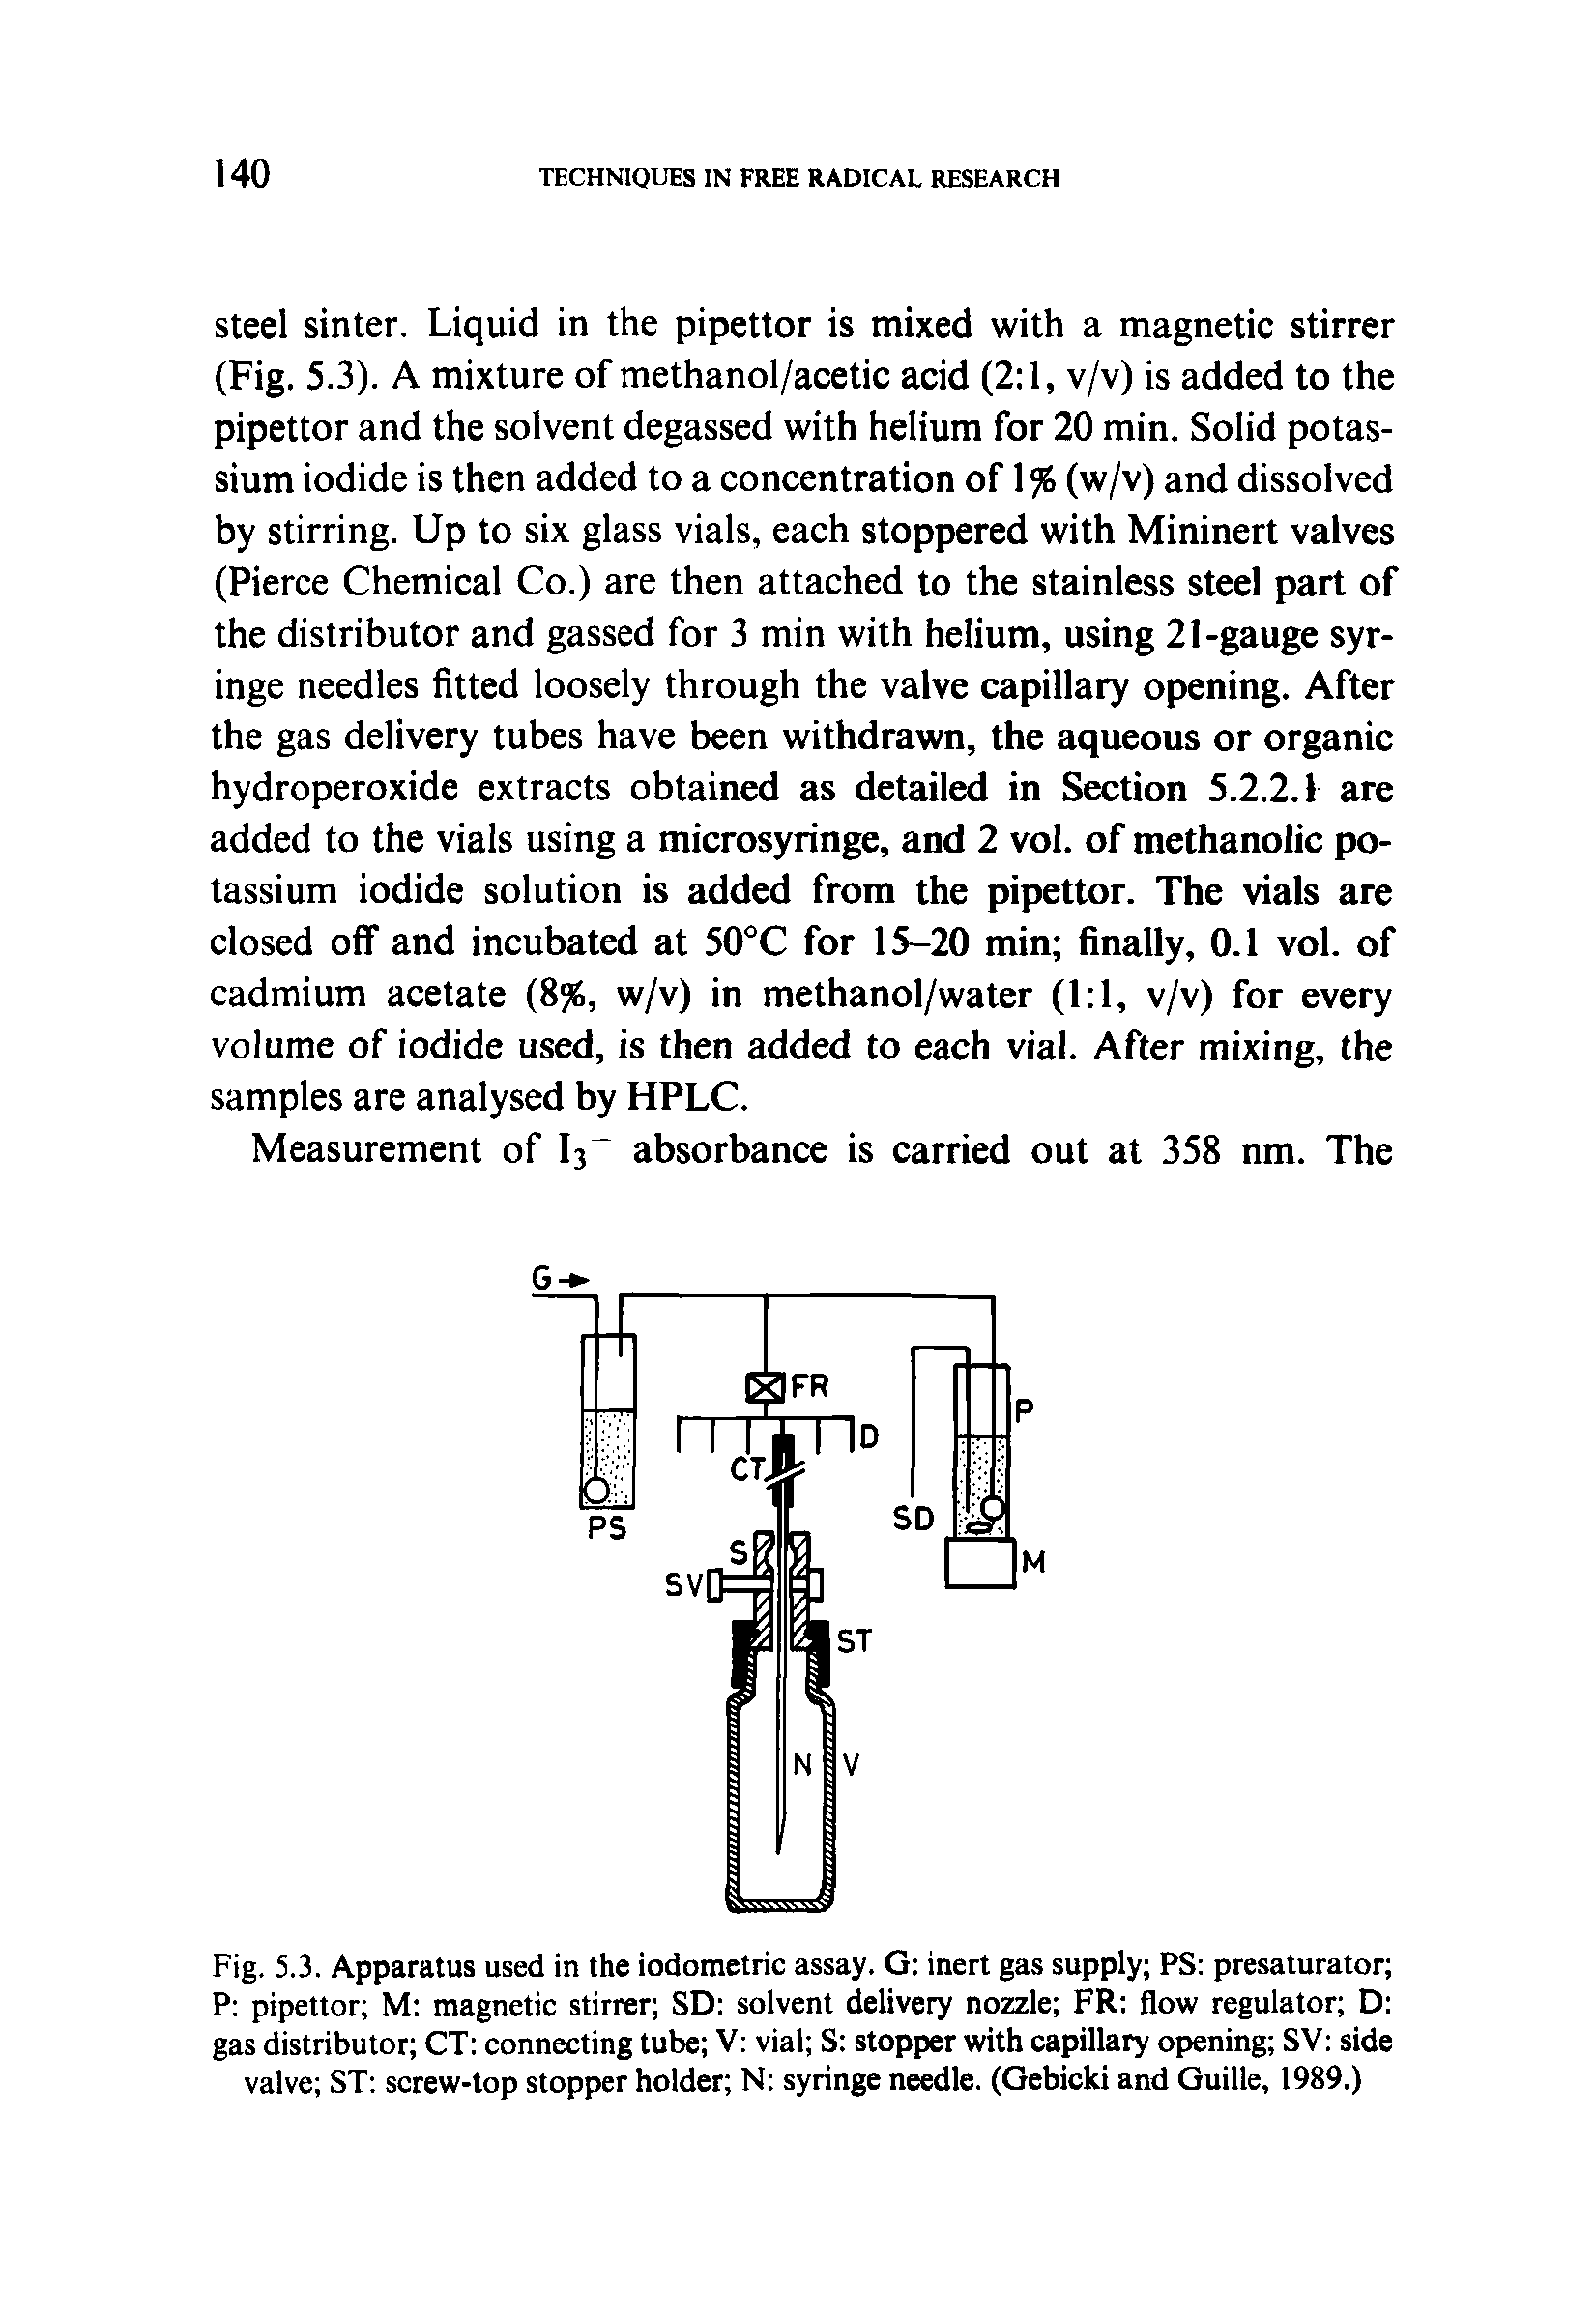 Fig. 5.3. Apparatus used in the iodometric assay. G inert gas supply PS presaturator P pipettor M magnetic stirrer SD solvent delivery nozzle FR flow regulator D gas distributor CT connecting tube V vial S stopper with capillary opening SV side valve ST screw-top stopper holder N syringe needle. (Gebicki and Guide, 1989.)...